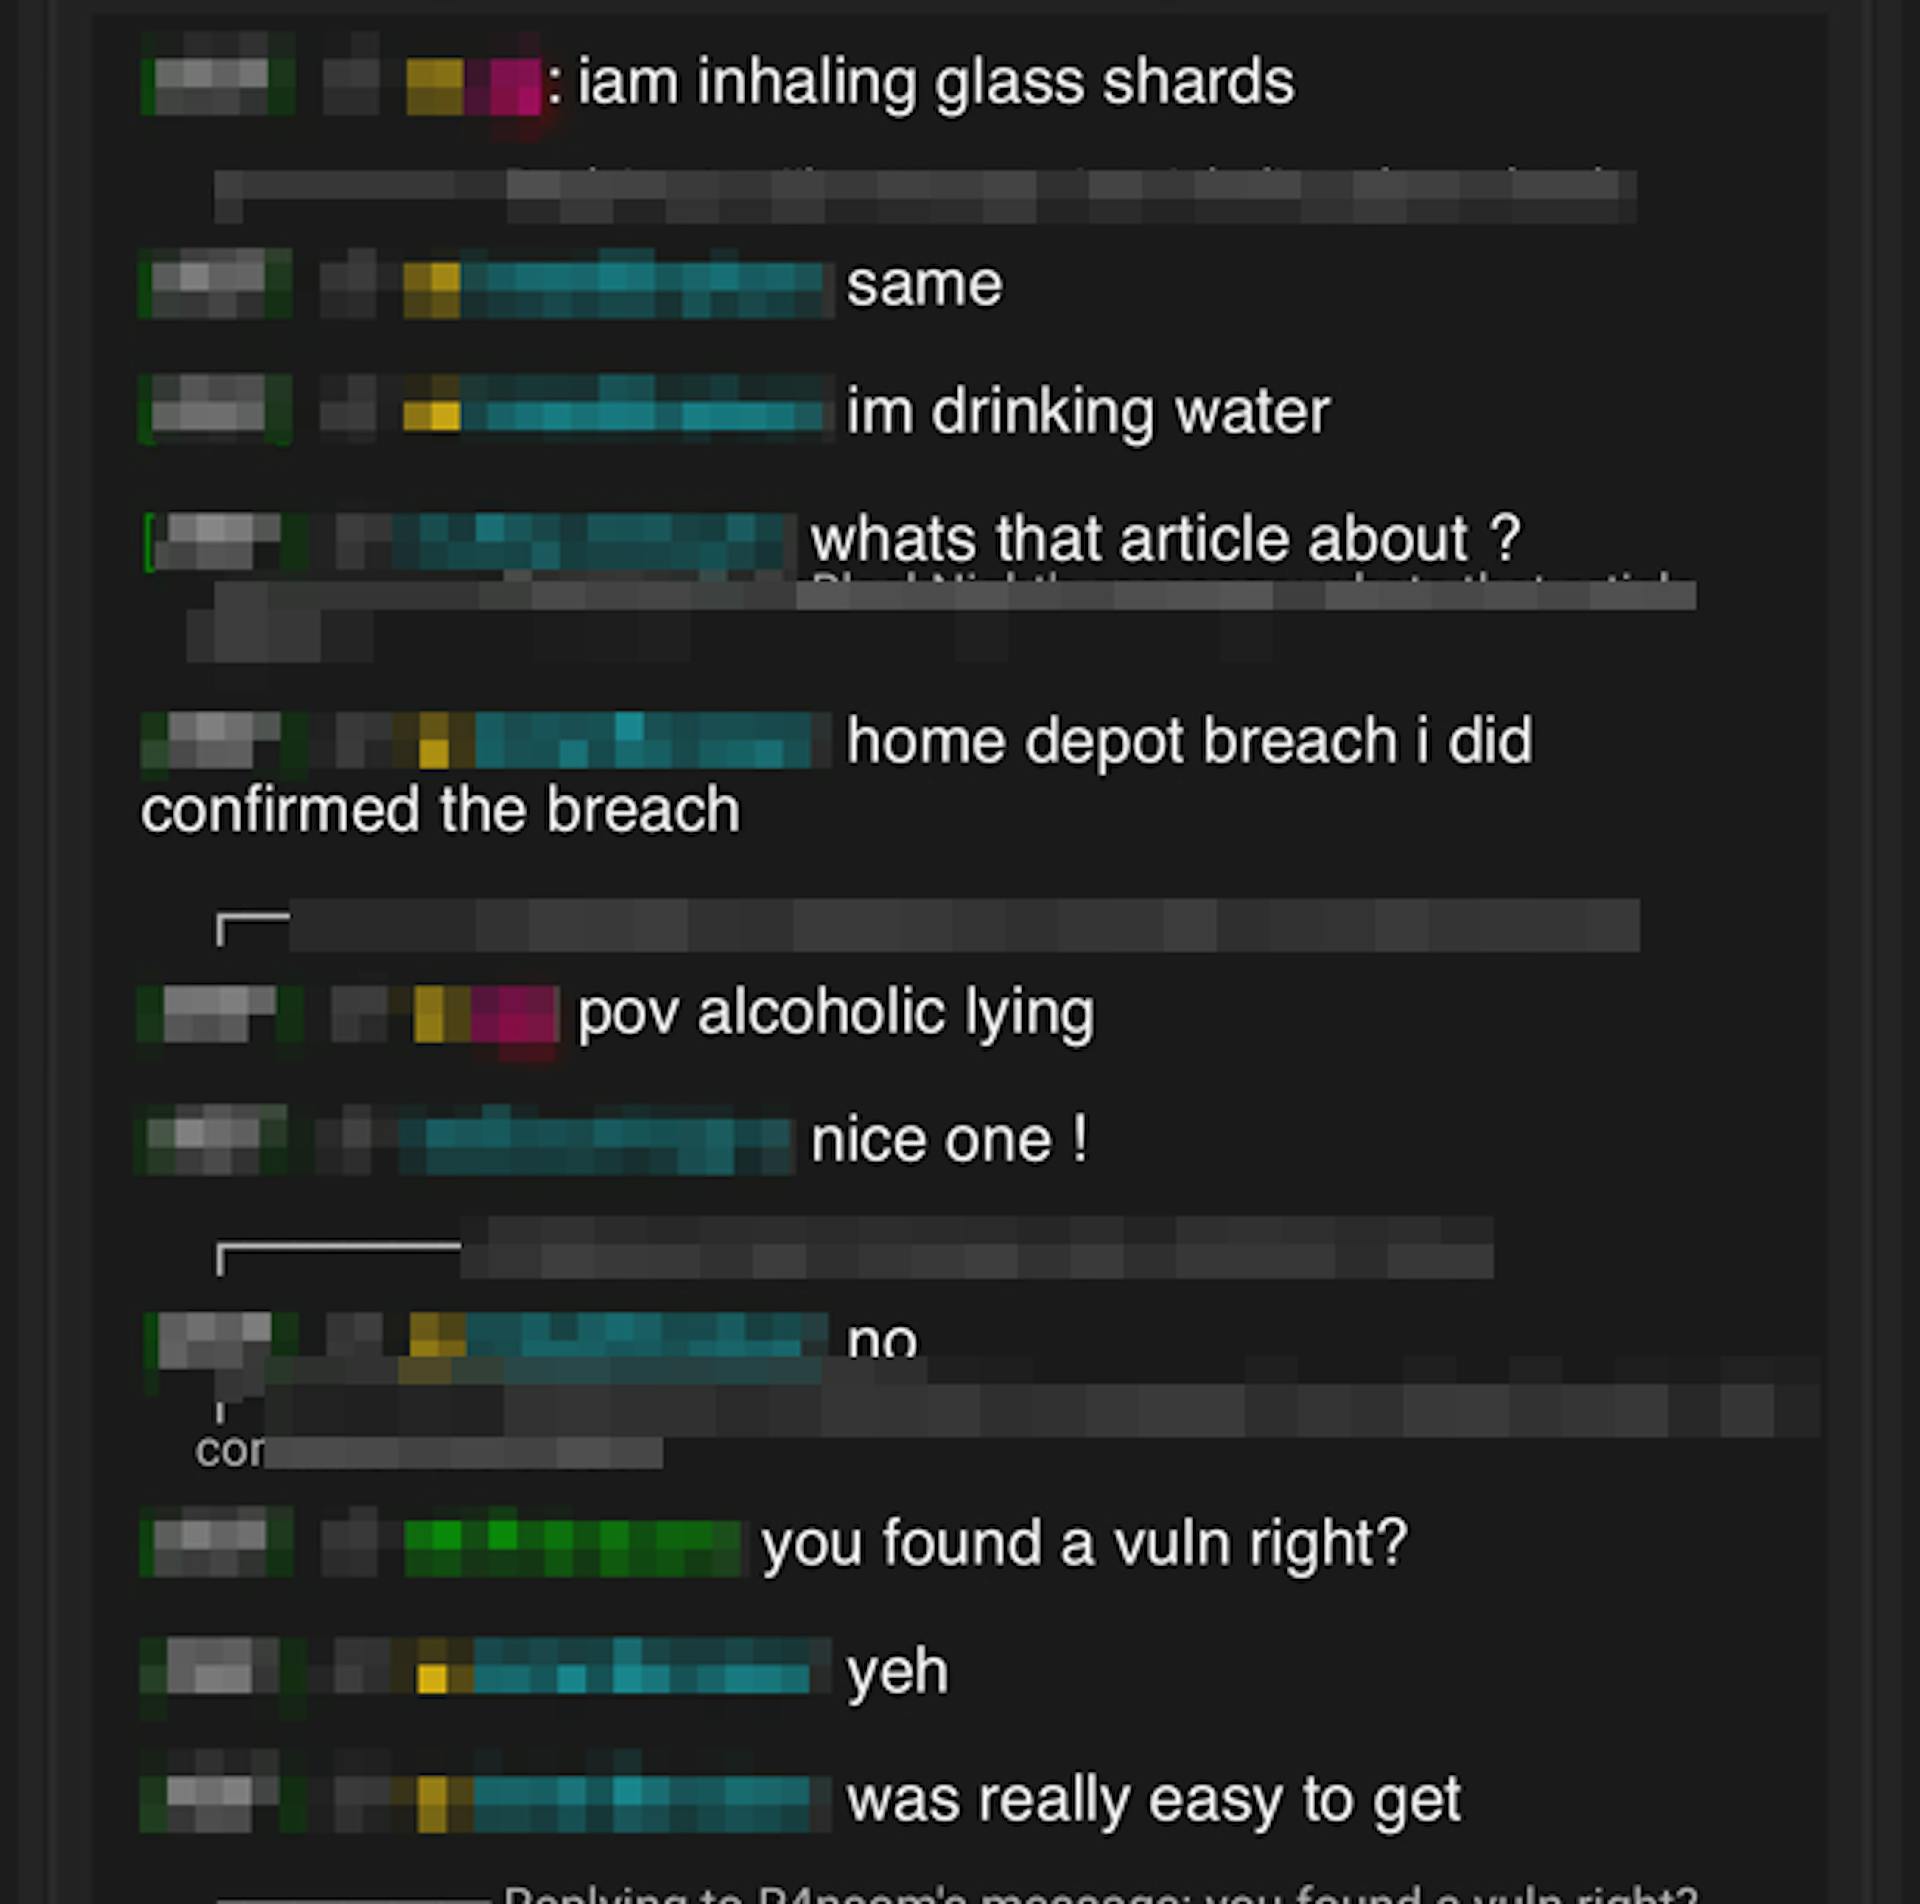 Chats on breach activity 